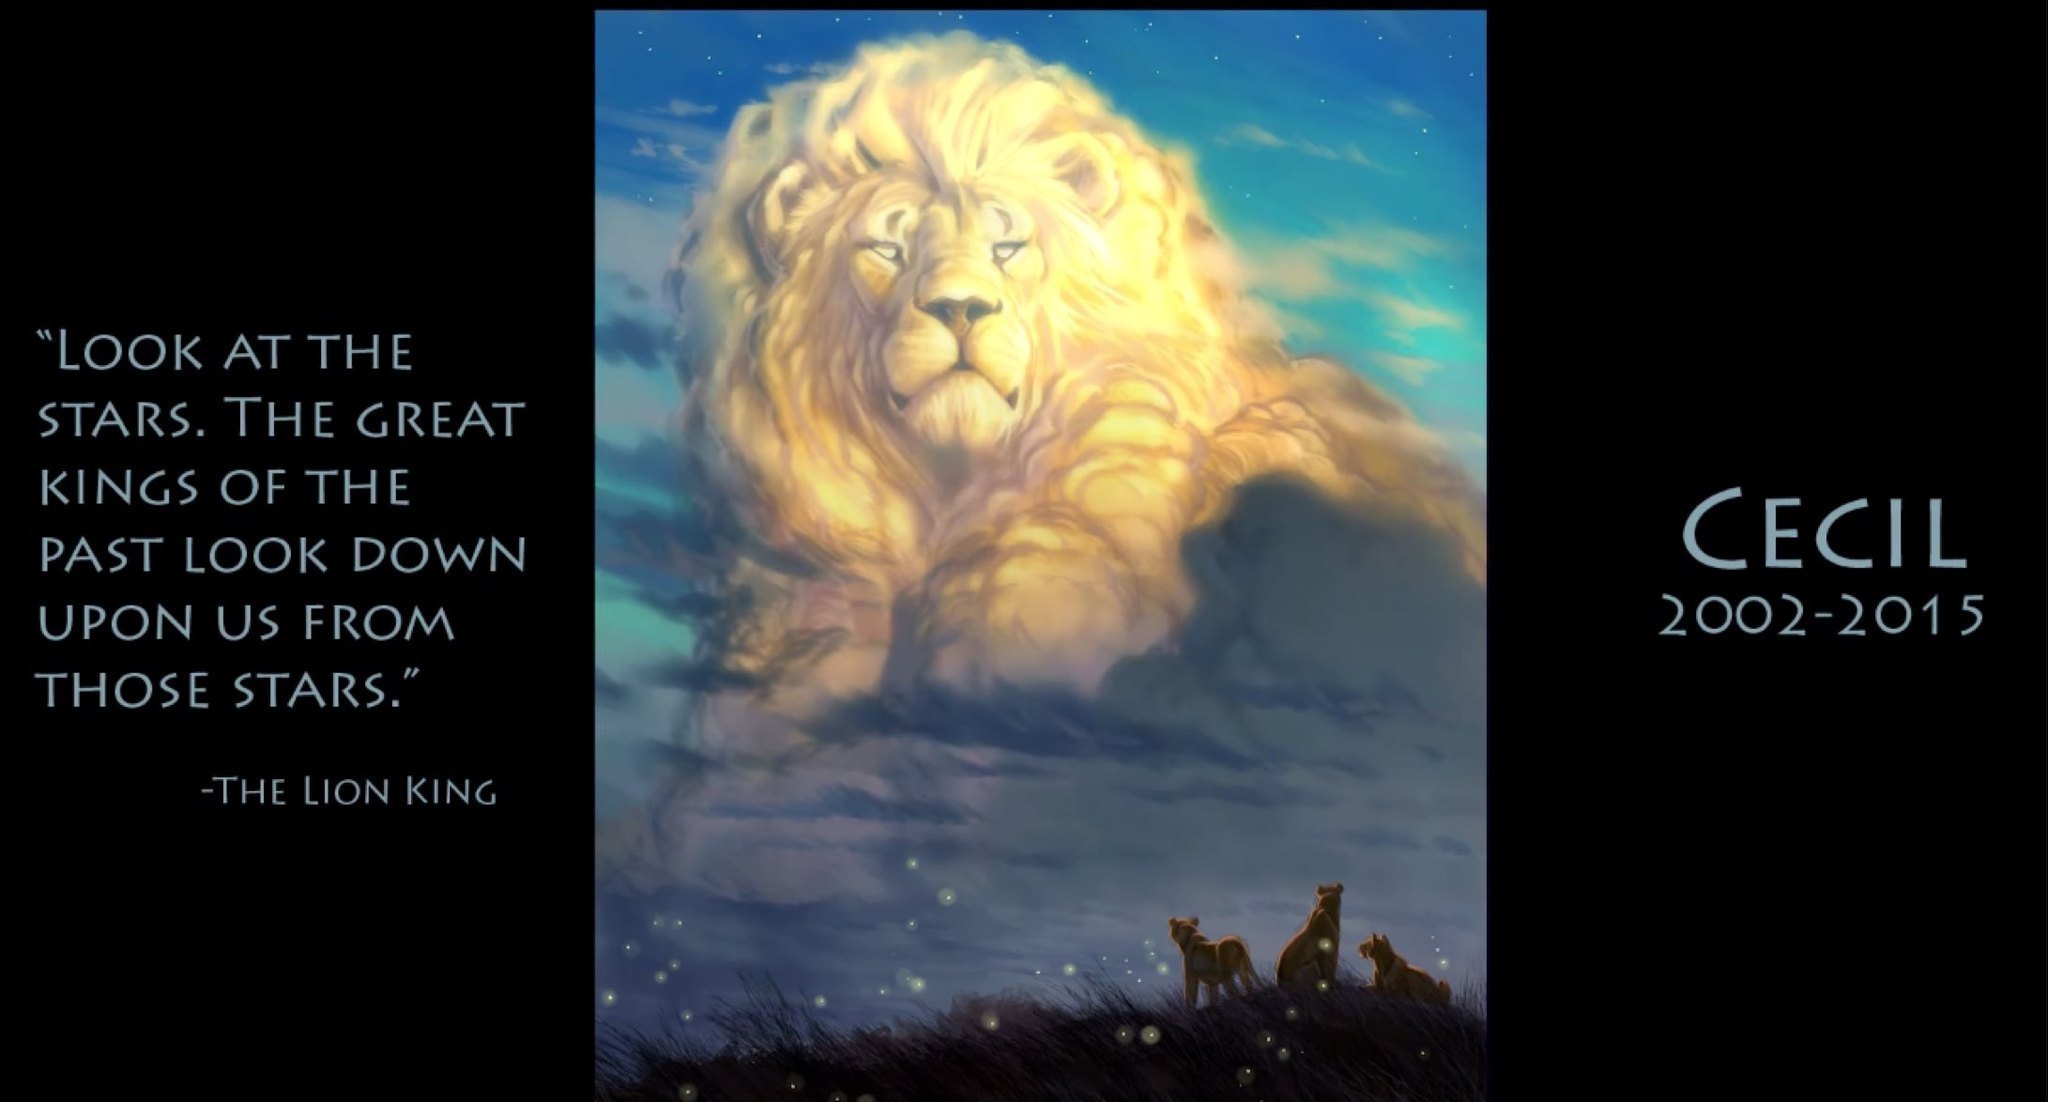 'Lion King' animator pays tribute to Cecil the lion - LA Times2048 x 1102